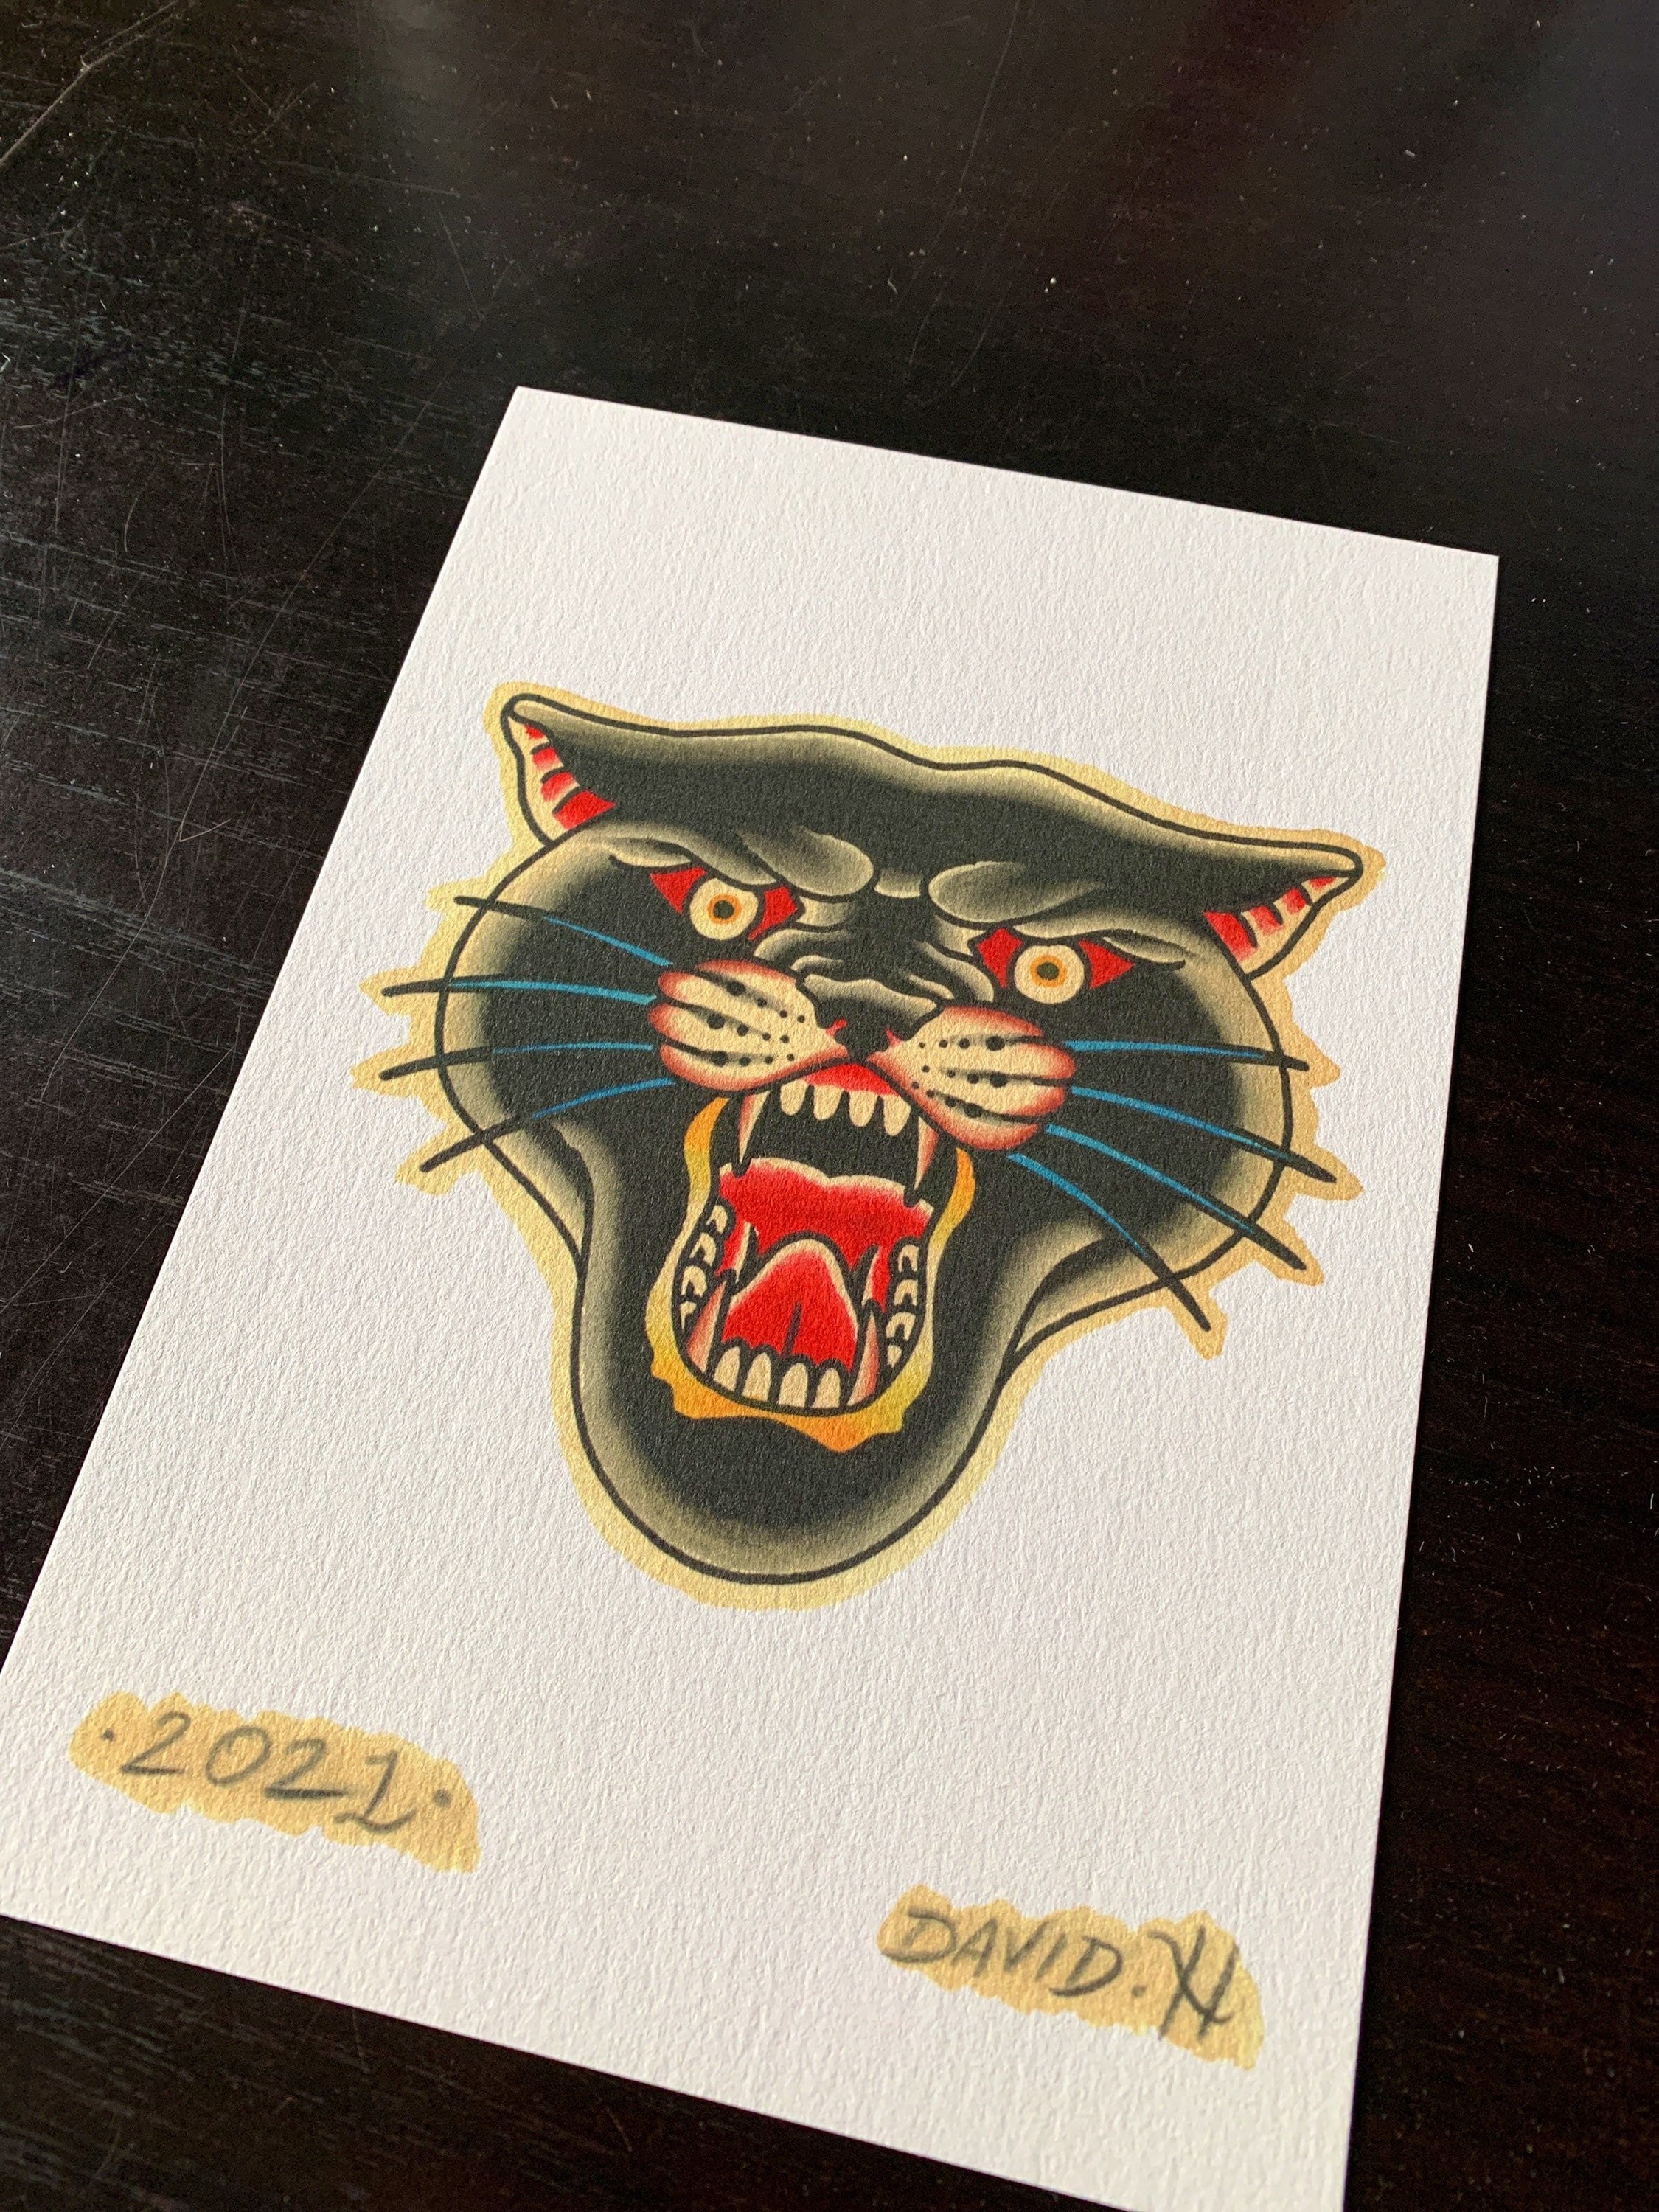 10 Traditional Panther Head Tattoo That Will Blow Your Mind  alexie